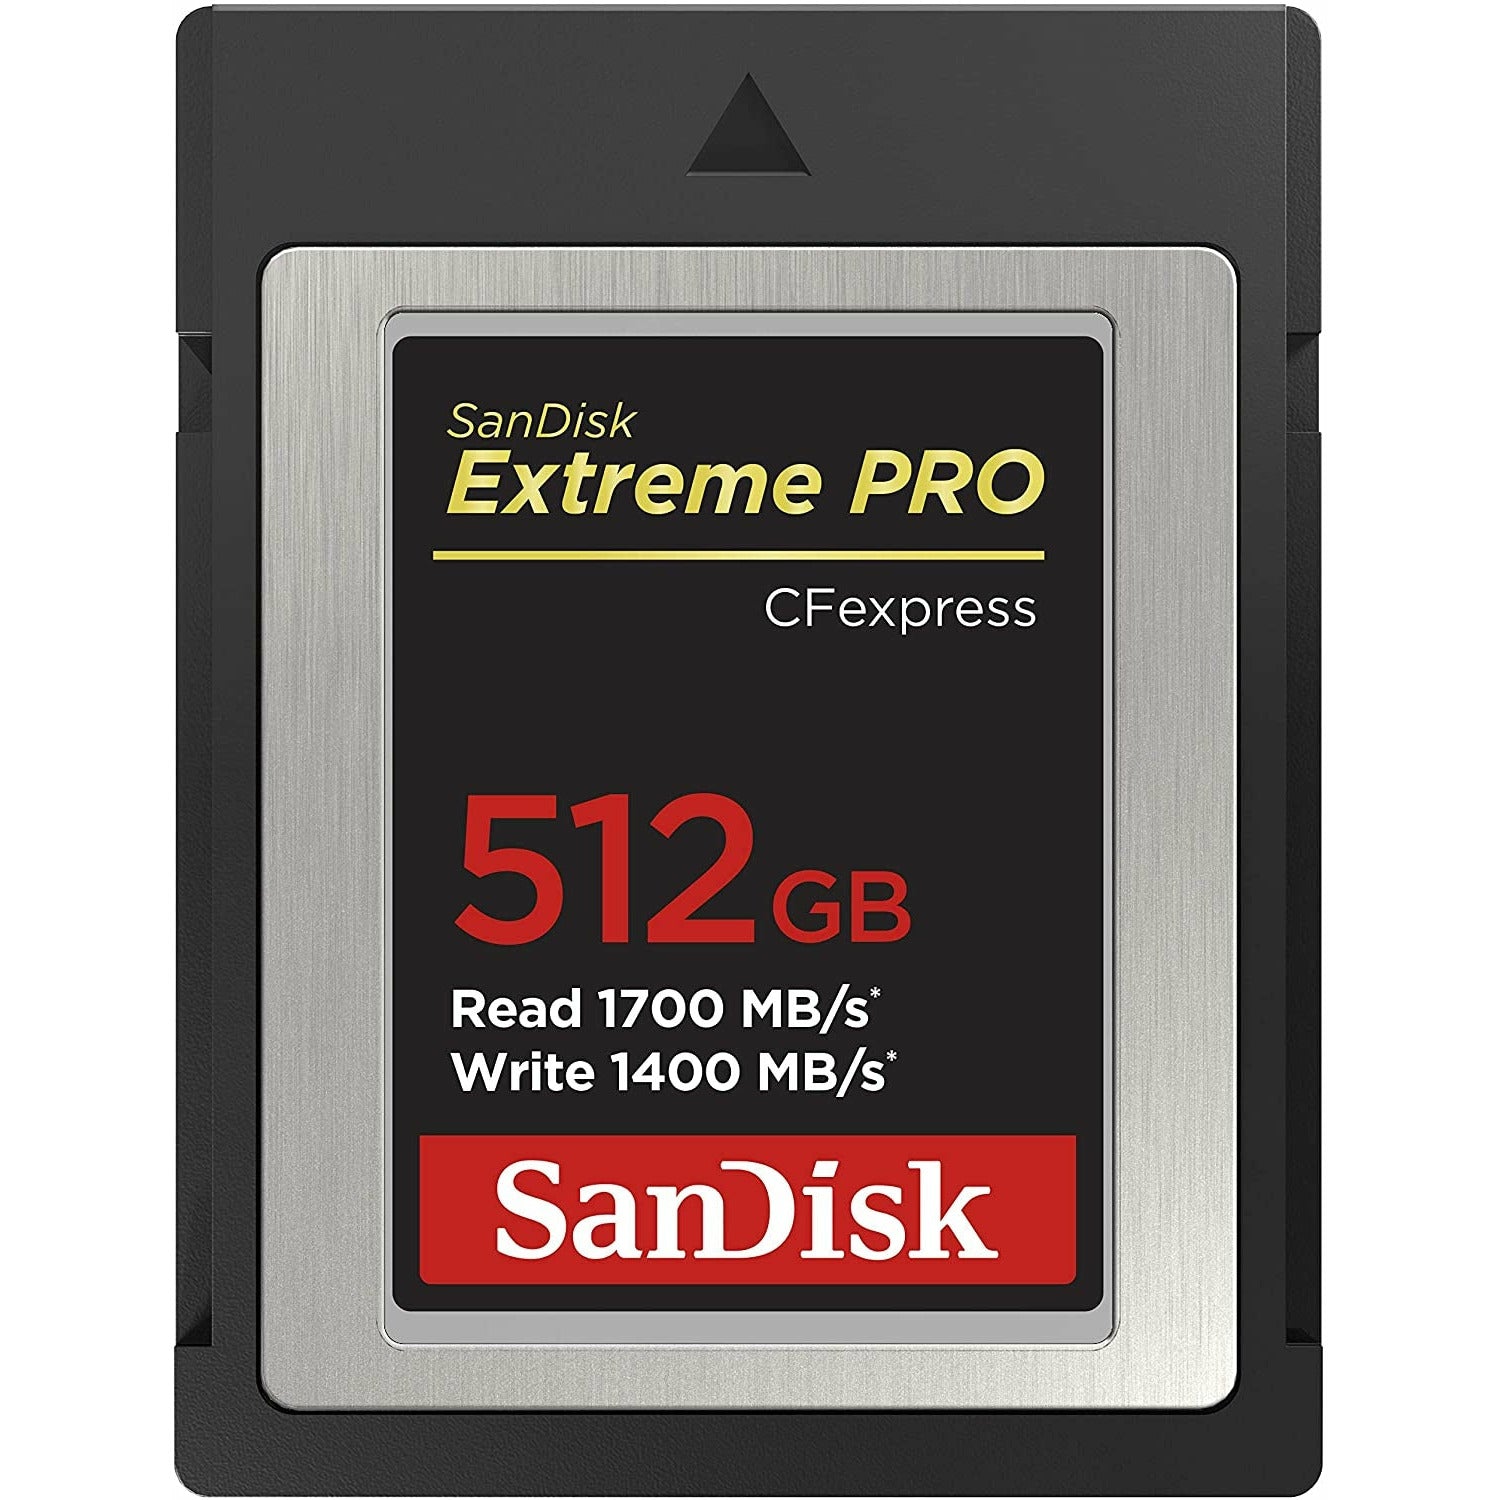 SanDisk 512GB Extreme PRO CFexpress Card Type B - SDCFE-512G-GN4NN READ 1700 MB/S WRITE 1400MB/S